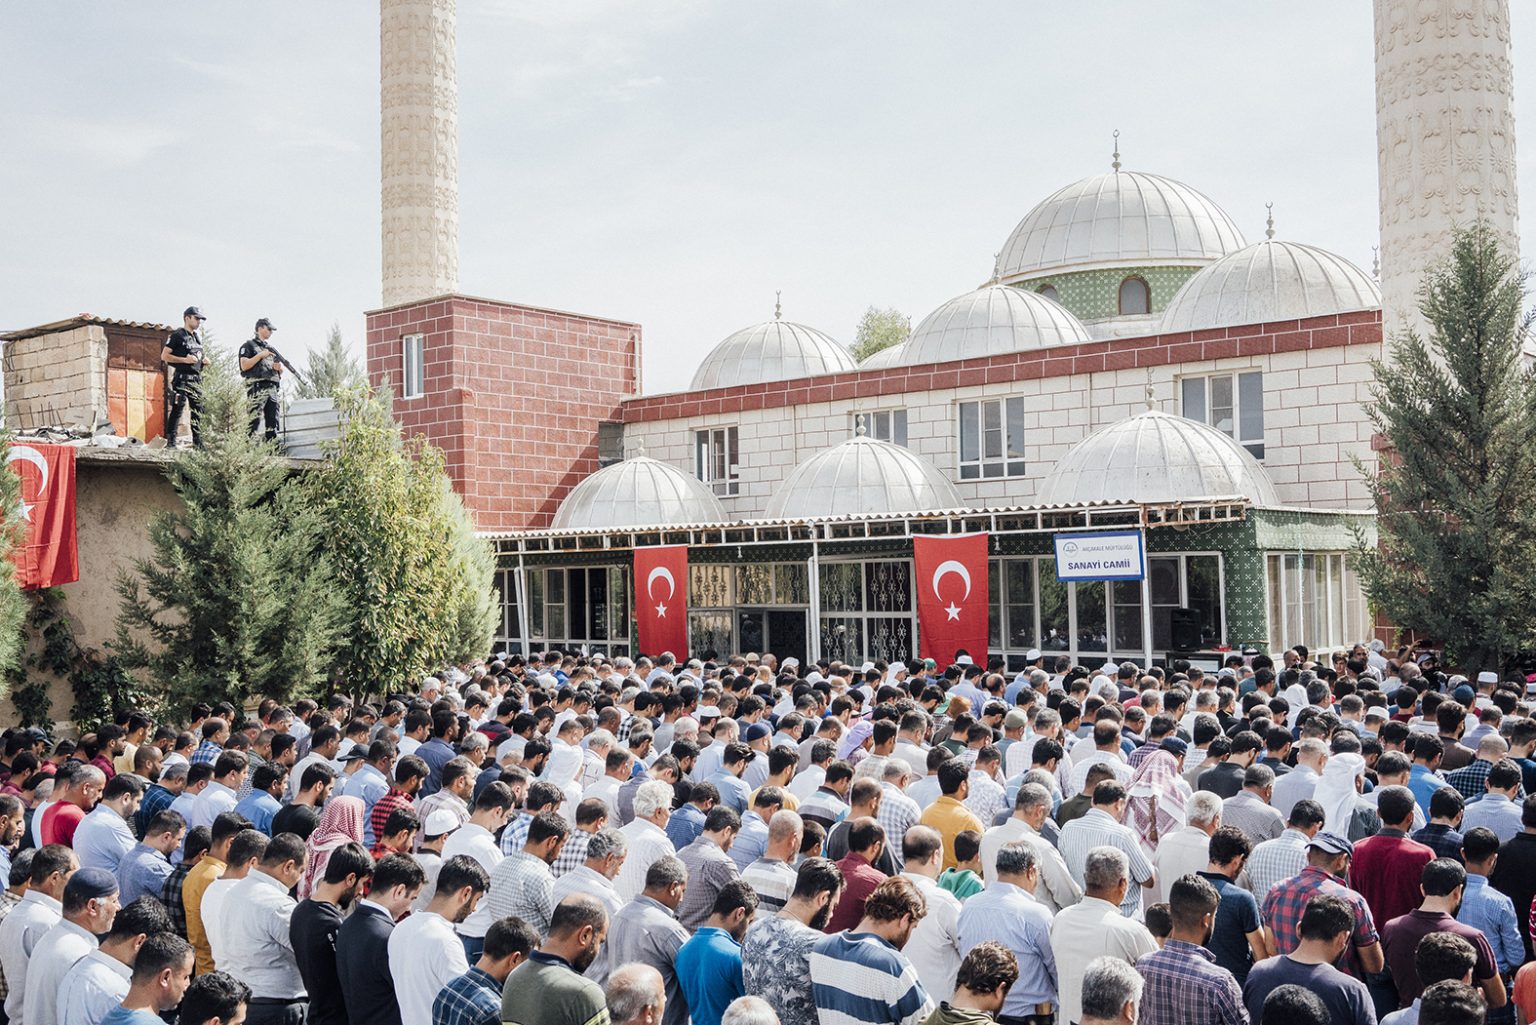 TURKEY. Akcakale. 11 October, 2019 - People on the courtyard of a mosque in Akcakale during the funeral of Mohammed Omar, a 9 months Syrian baby who was killed in rocket and mortar attacks in Akcakale.TURCHIA. Akcakale. 11 October, 2019 - Civili nel cortile di una moschea ad Akcakale durante i funerali di Mohammed Omar, un bambino siriano di 9 mesi ucciso durante gli attacchi nella cittài di Akcakale.